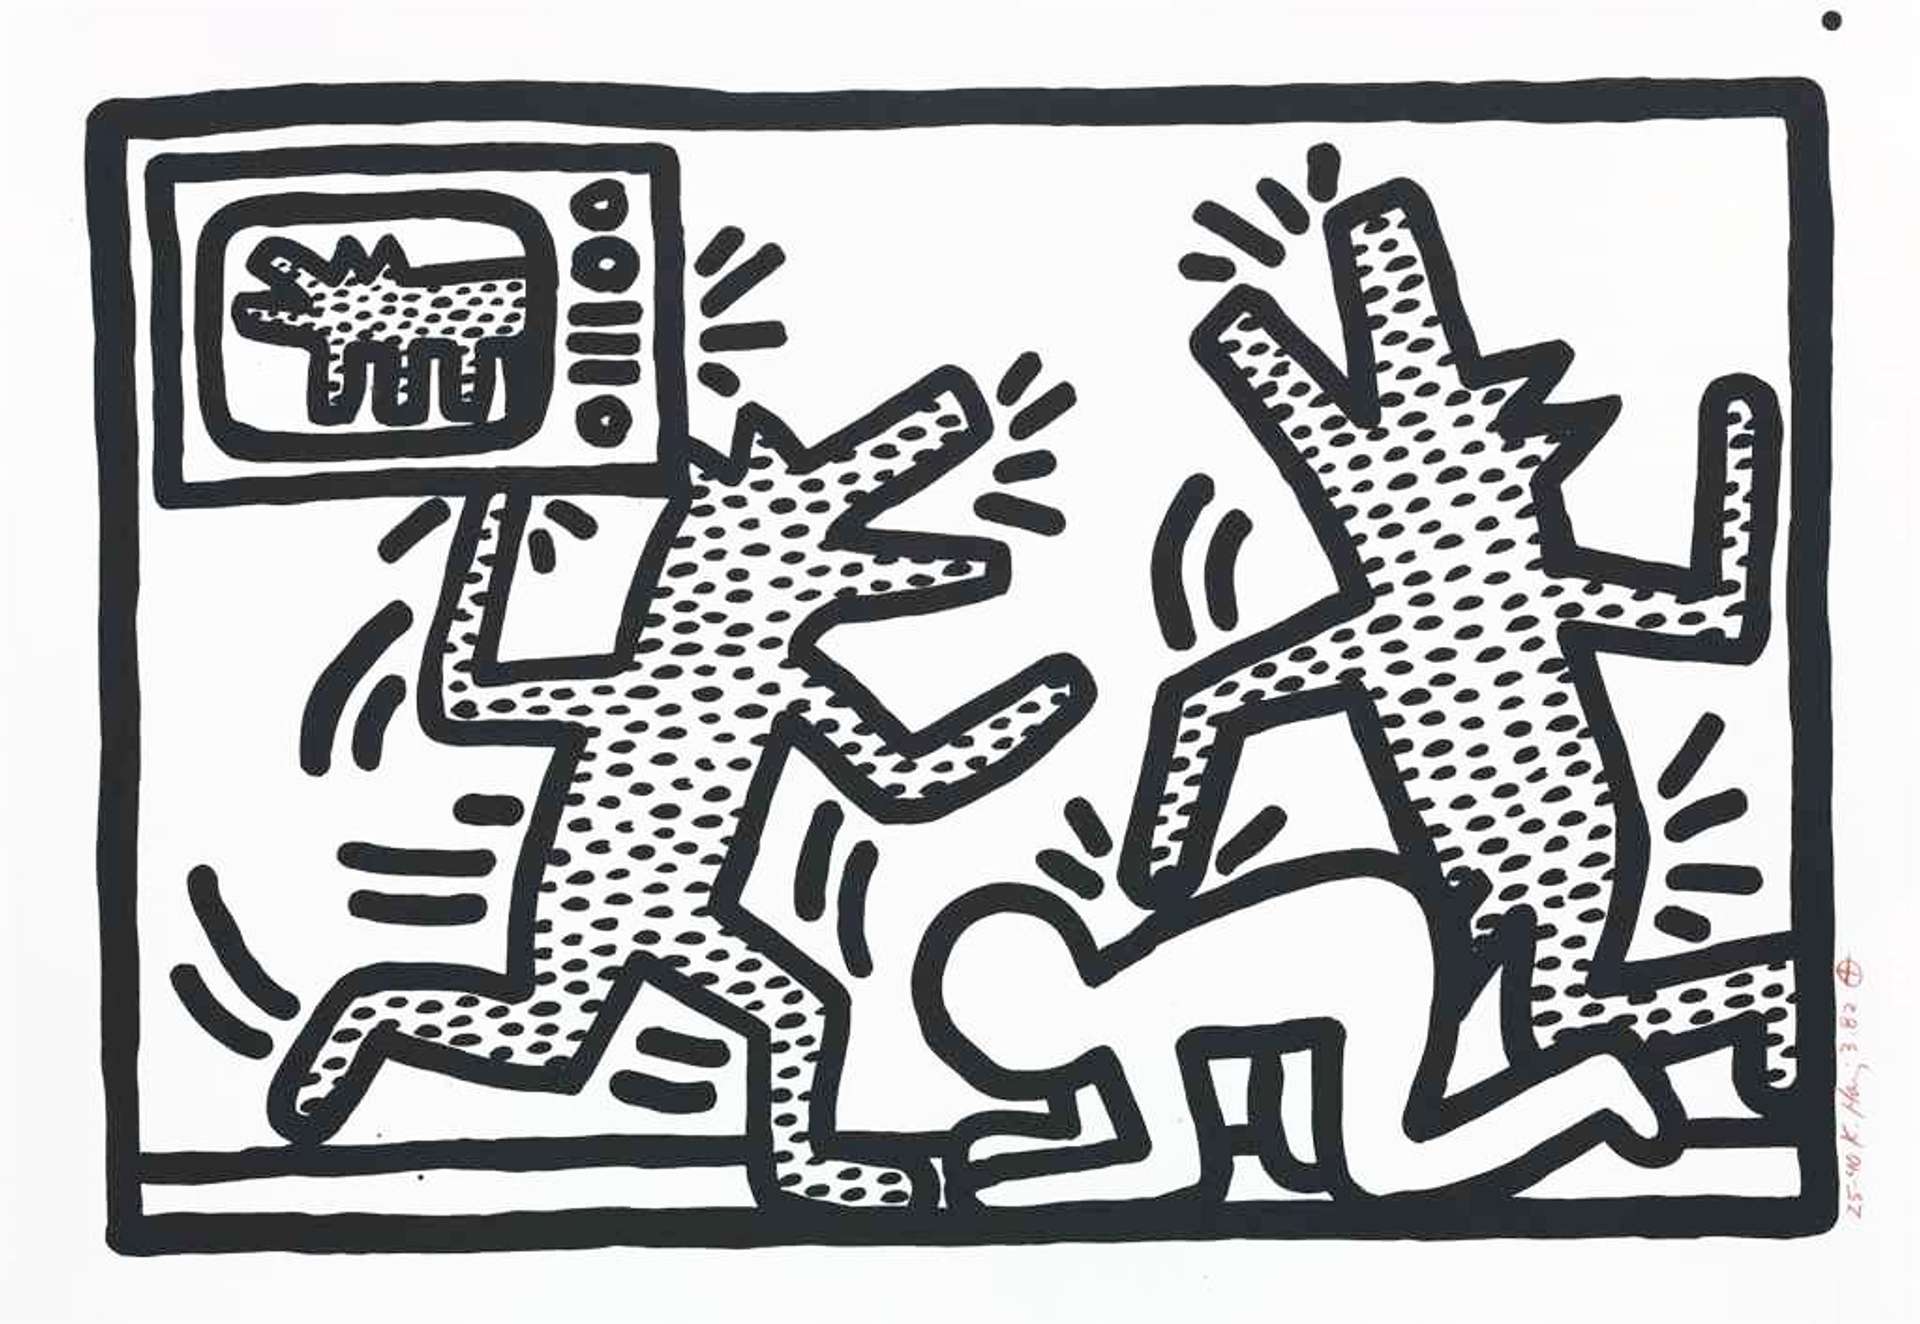 Keith Haring: Barking Dogs - Signed Print